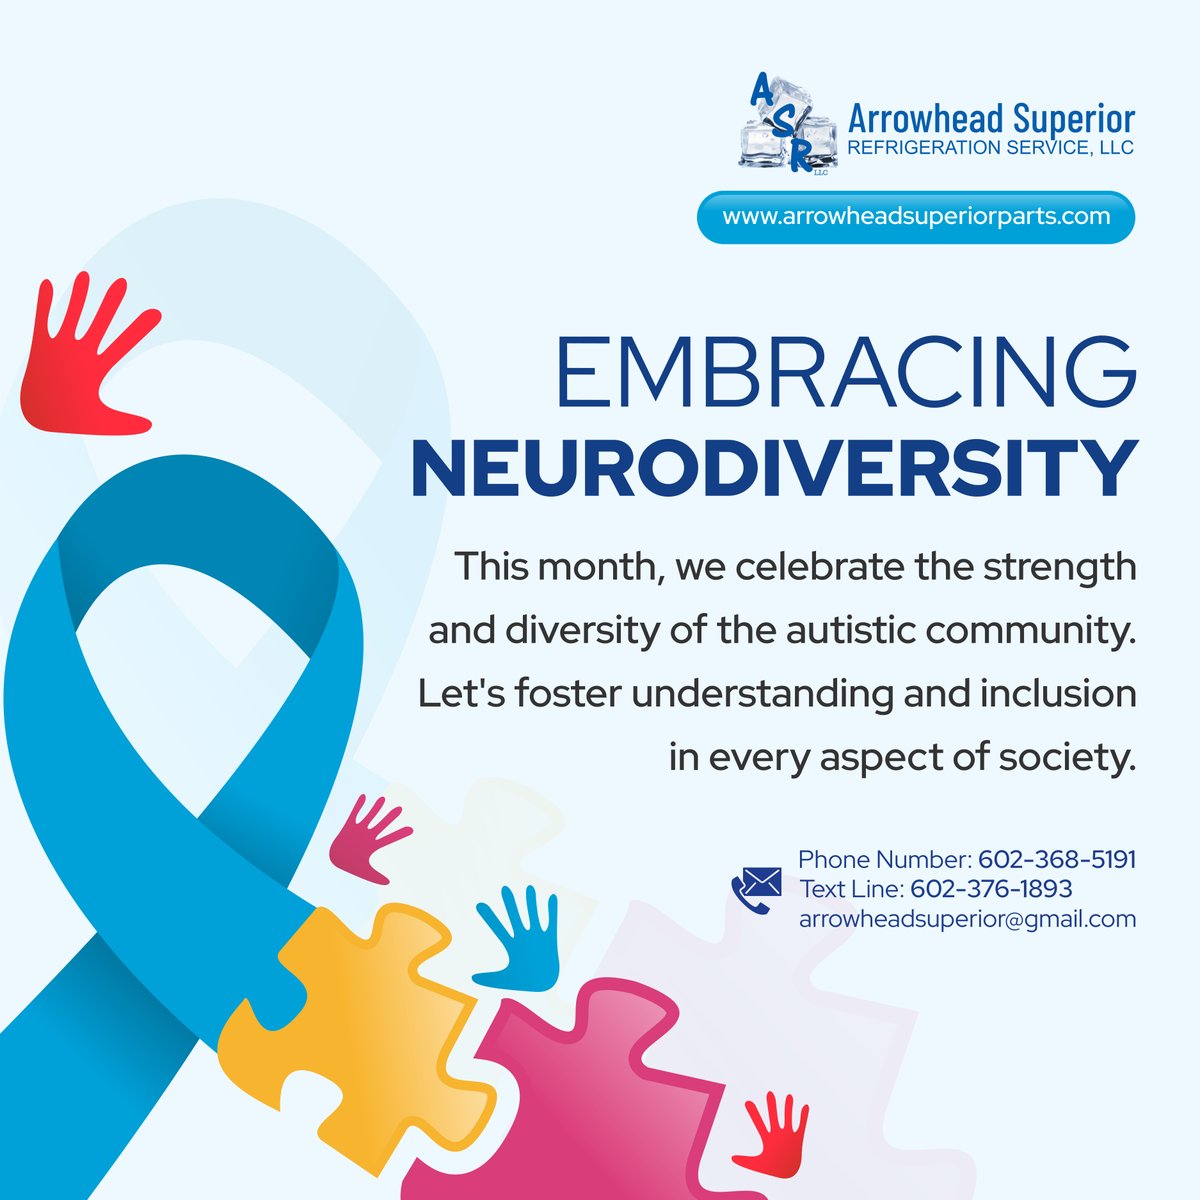 Awareness is the first step towards acceptance. Together, we can create a world that celebrates all forms of neurodiversity.  

#Neurodiversity #AutismAcceptance #InclusiveWorld #CelebrateDifferences #UnderstandingAutism #CommunitySupport #DiversityStrength #InclusionMatters